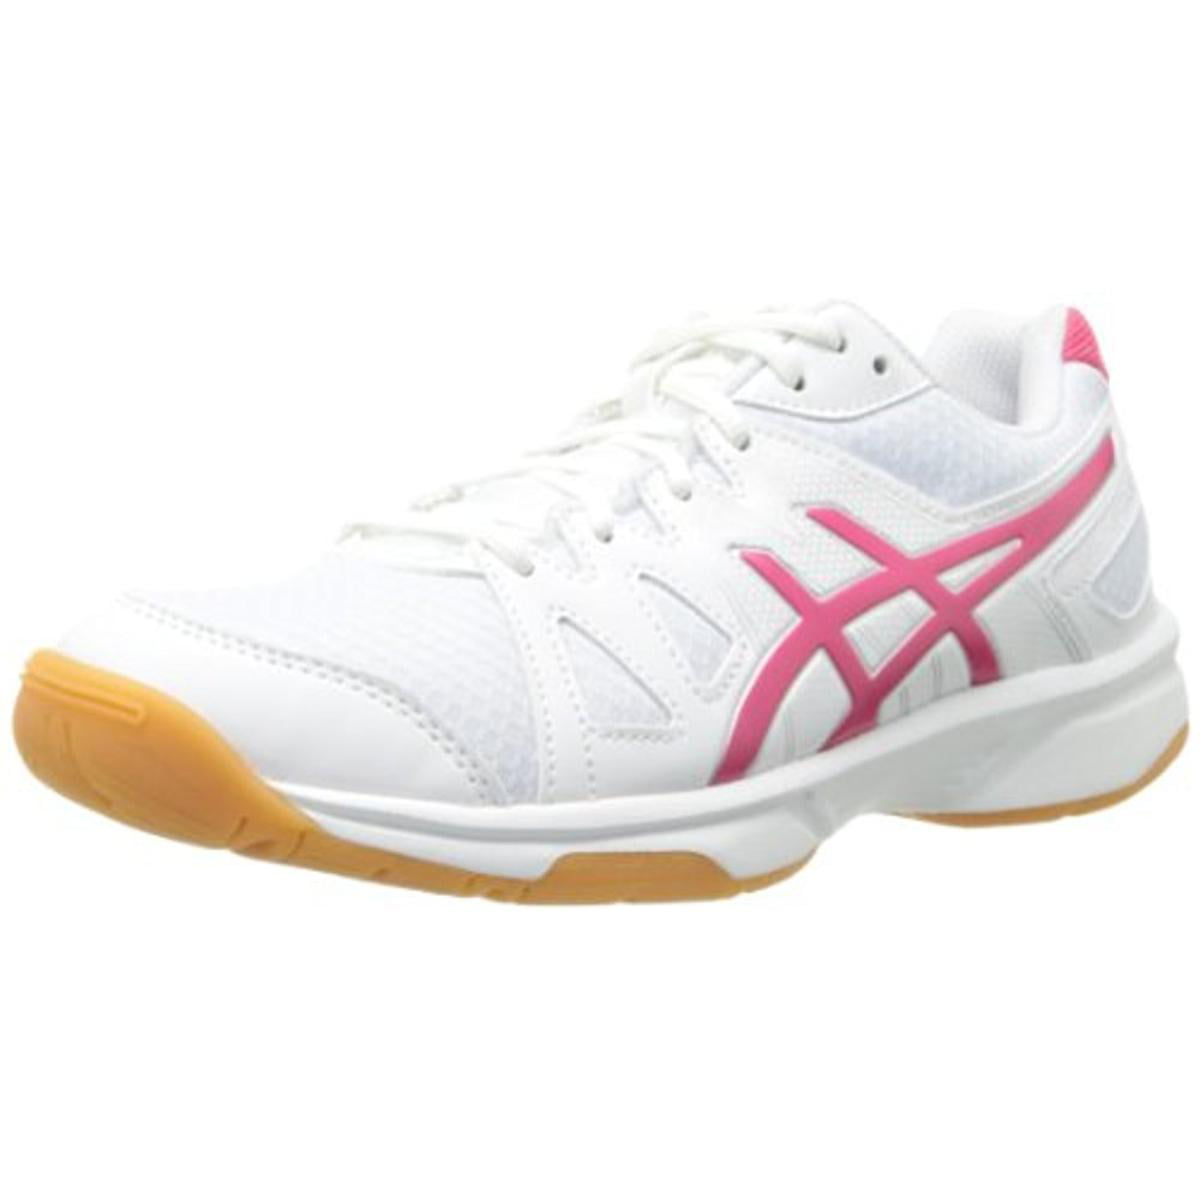 youth girls volleyball shoes